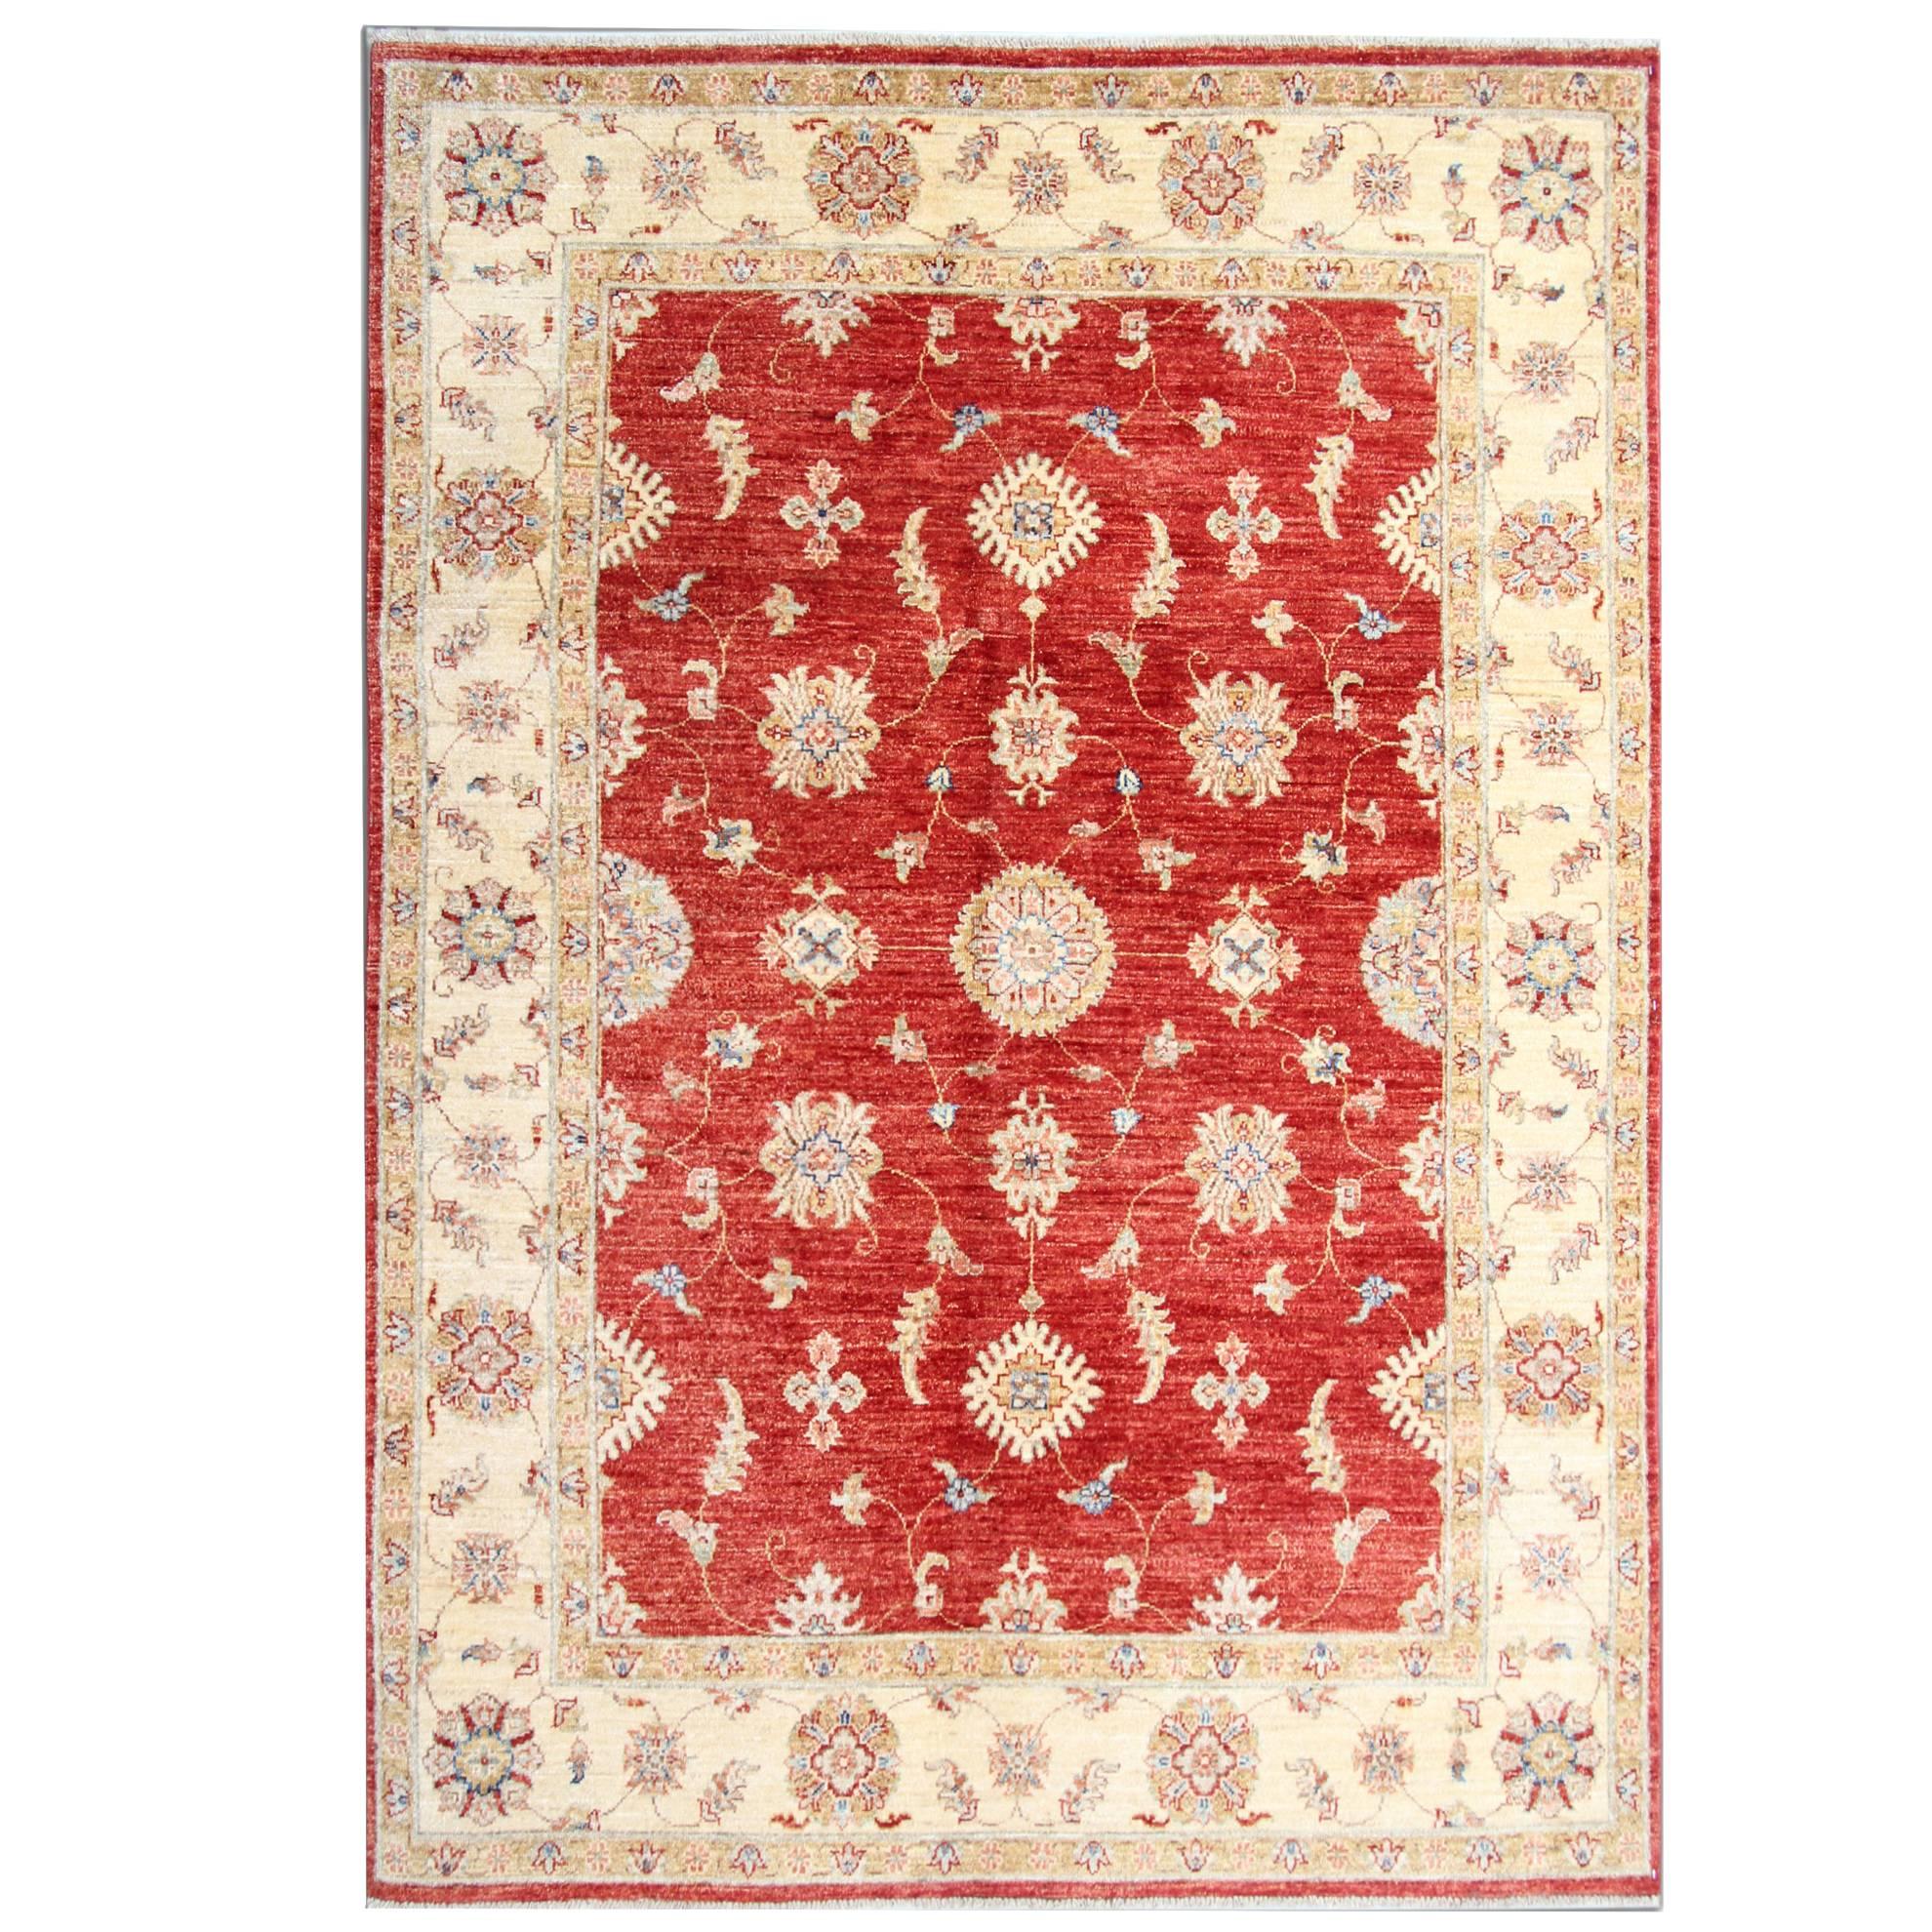 Red Hand Made Carpet Oriental Rugs, Floral Carpet for Sale